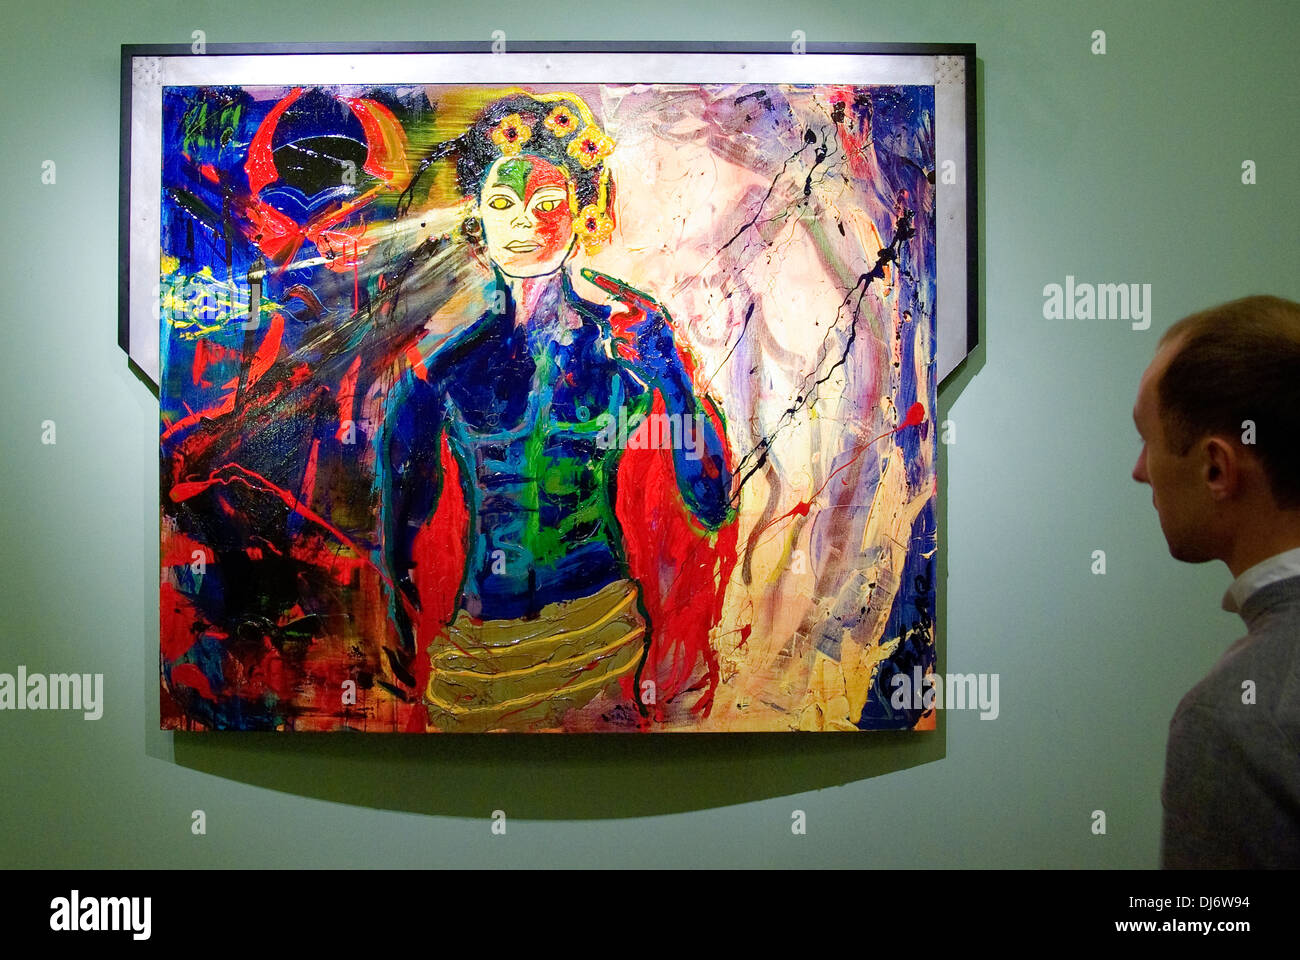 Russia. St. Petersburg. Exhibition of artwork by Sylvester Stallone in the Russian Museum. Stock Photo